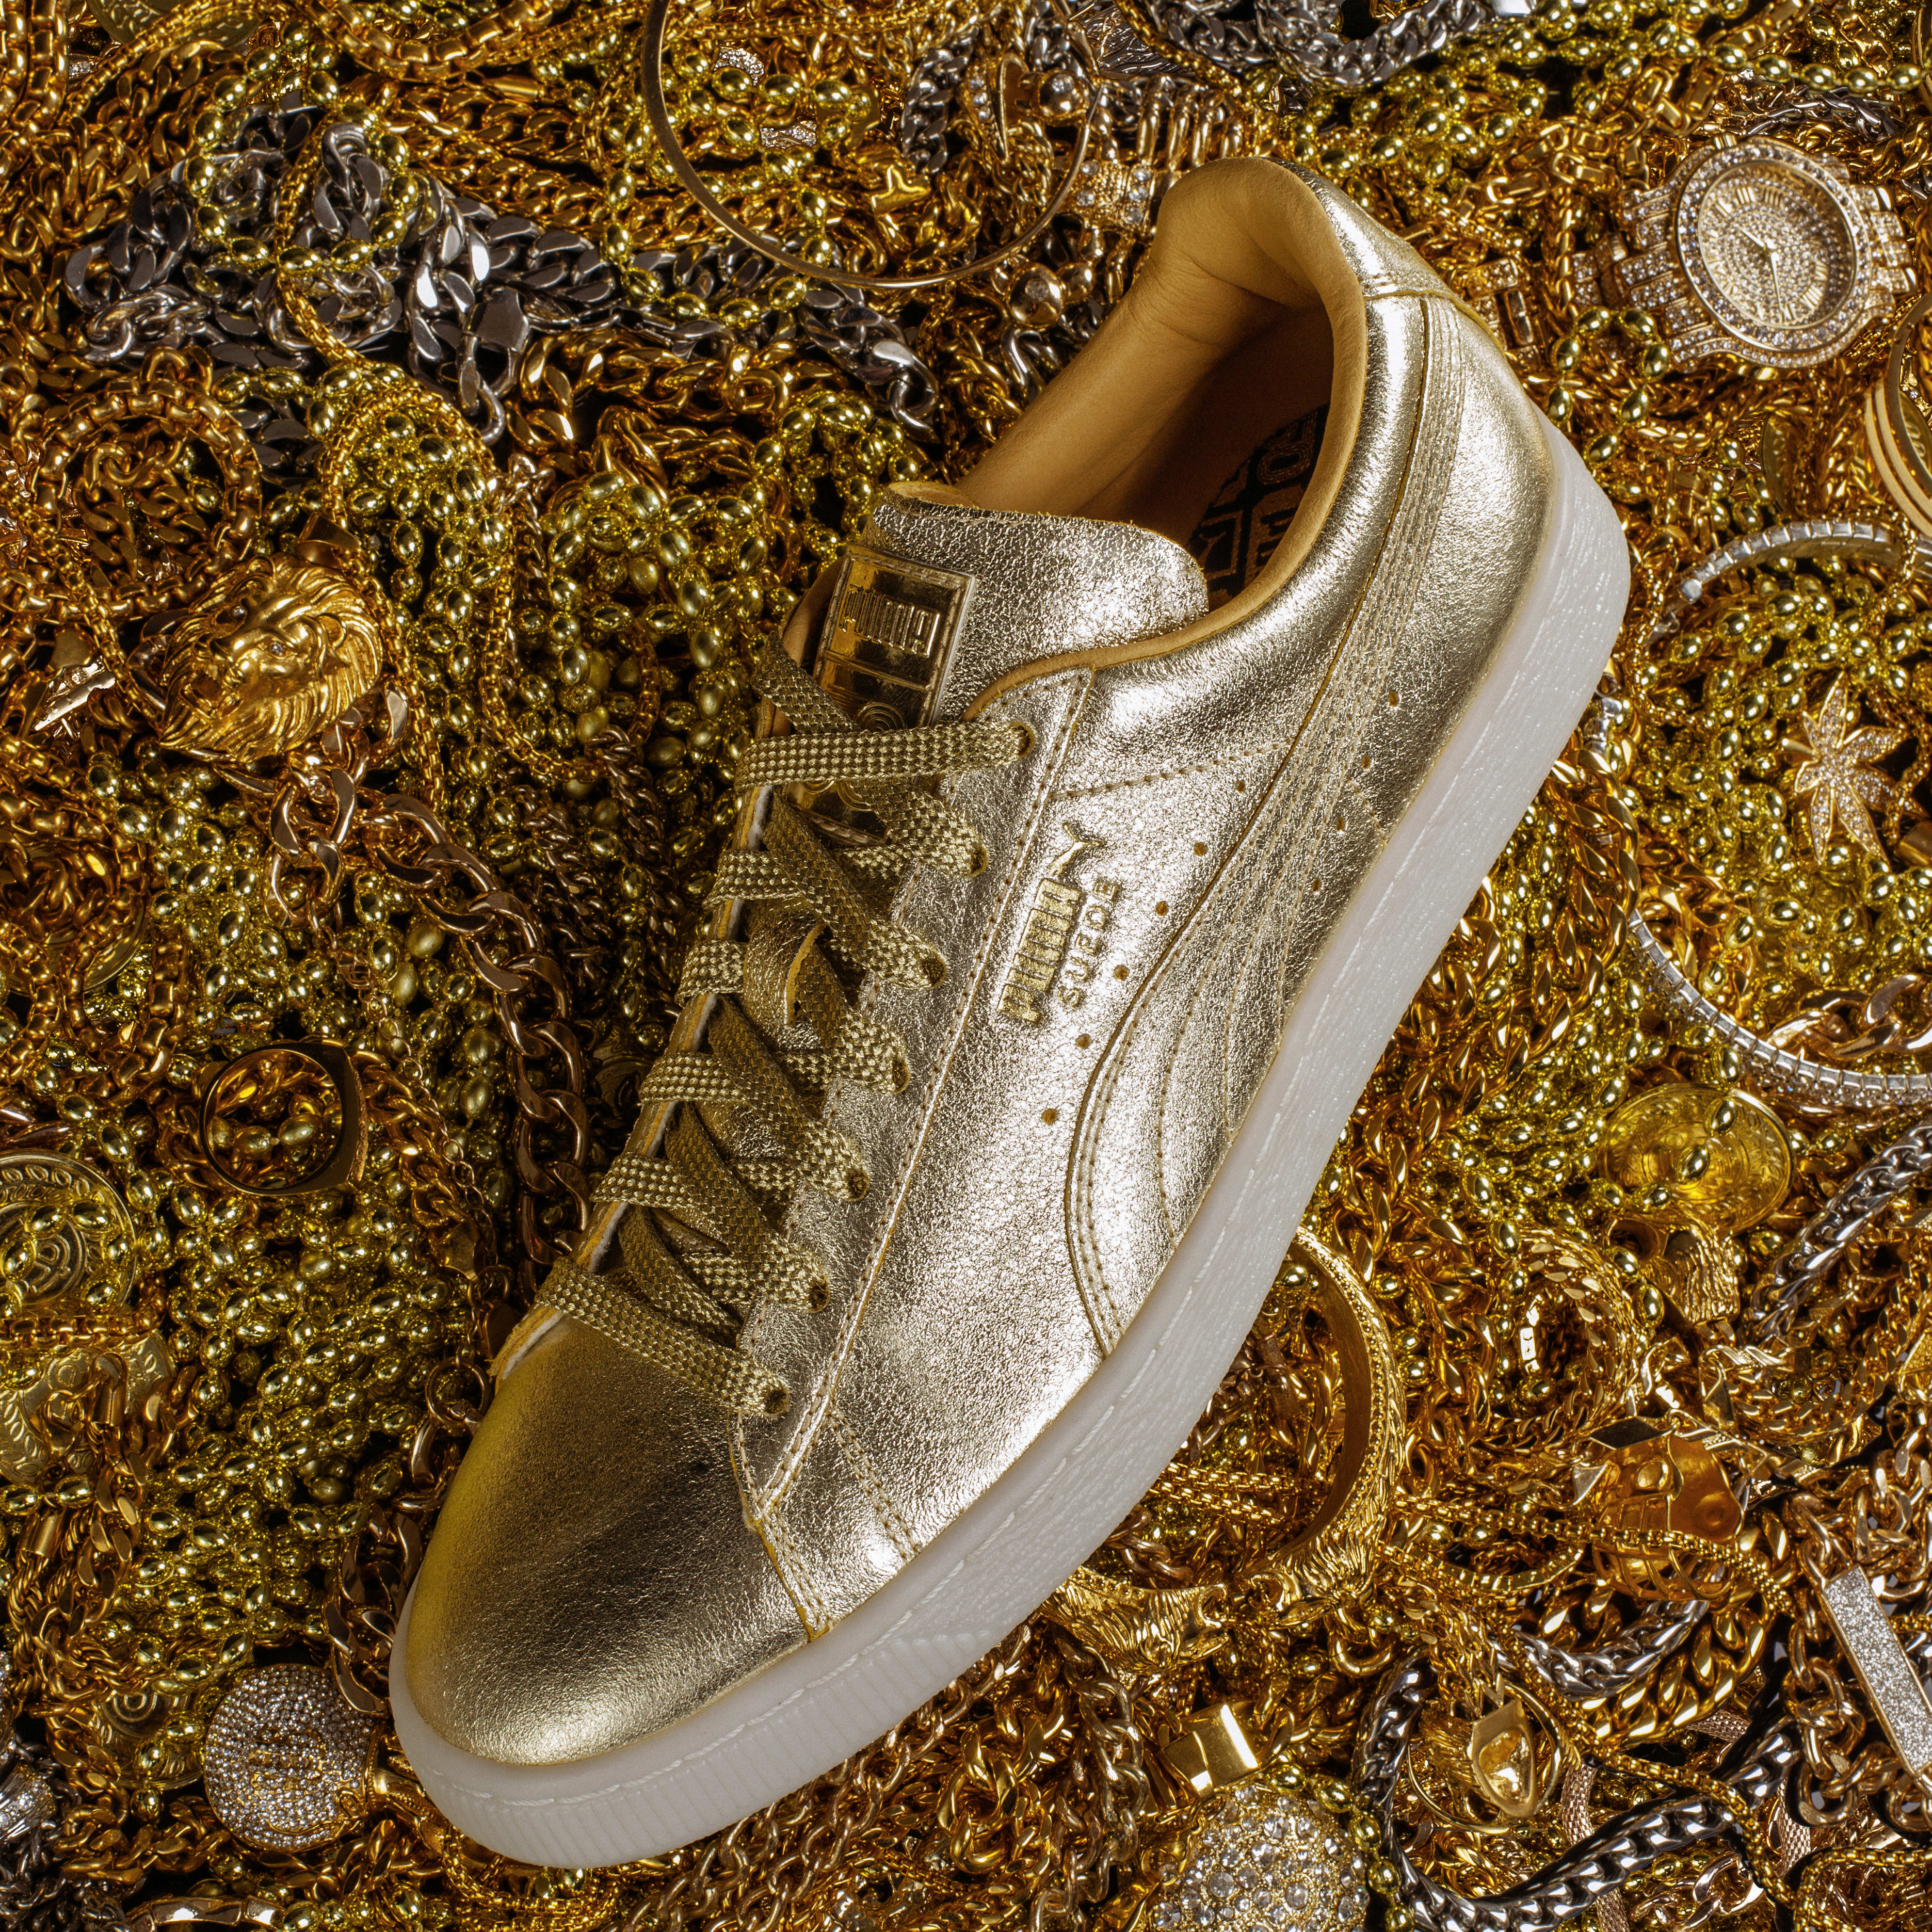 Puma Releases Golden Suede To Celebrate Suede’s 50th Anniversary